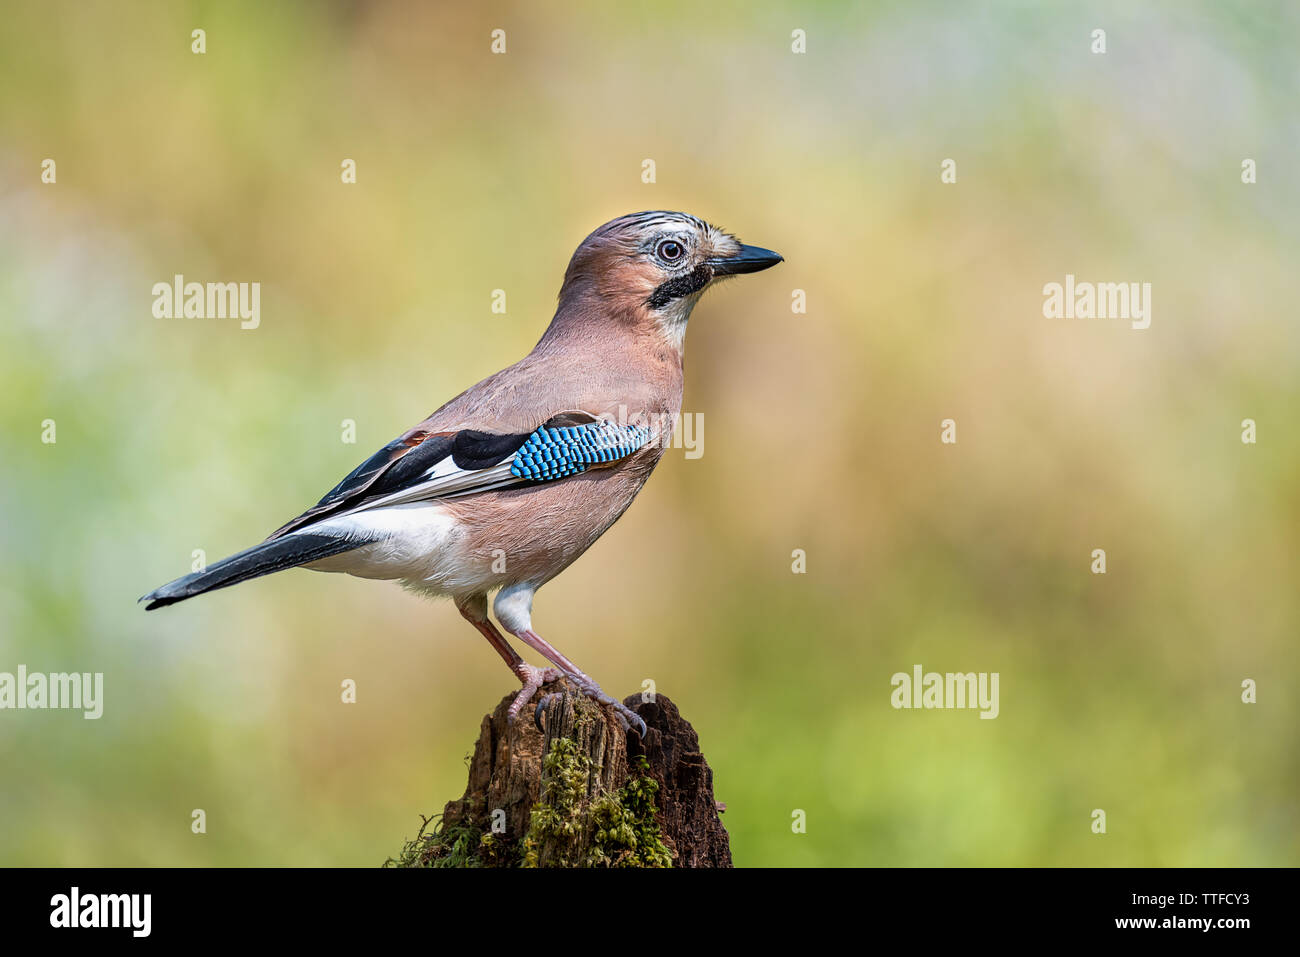 A side view profile portrait of a jay perched on the top of an old tree stump Stock Photo